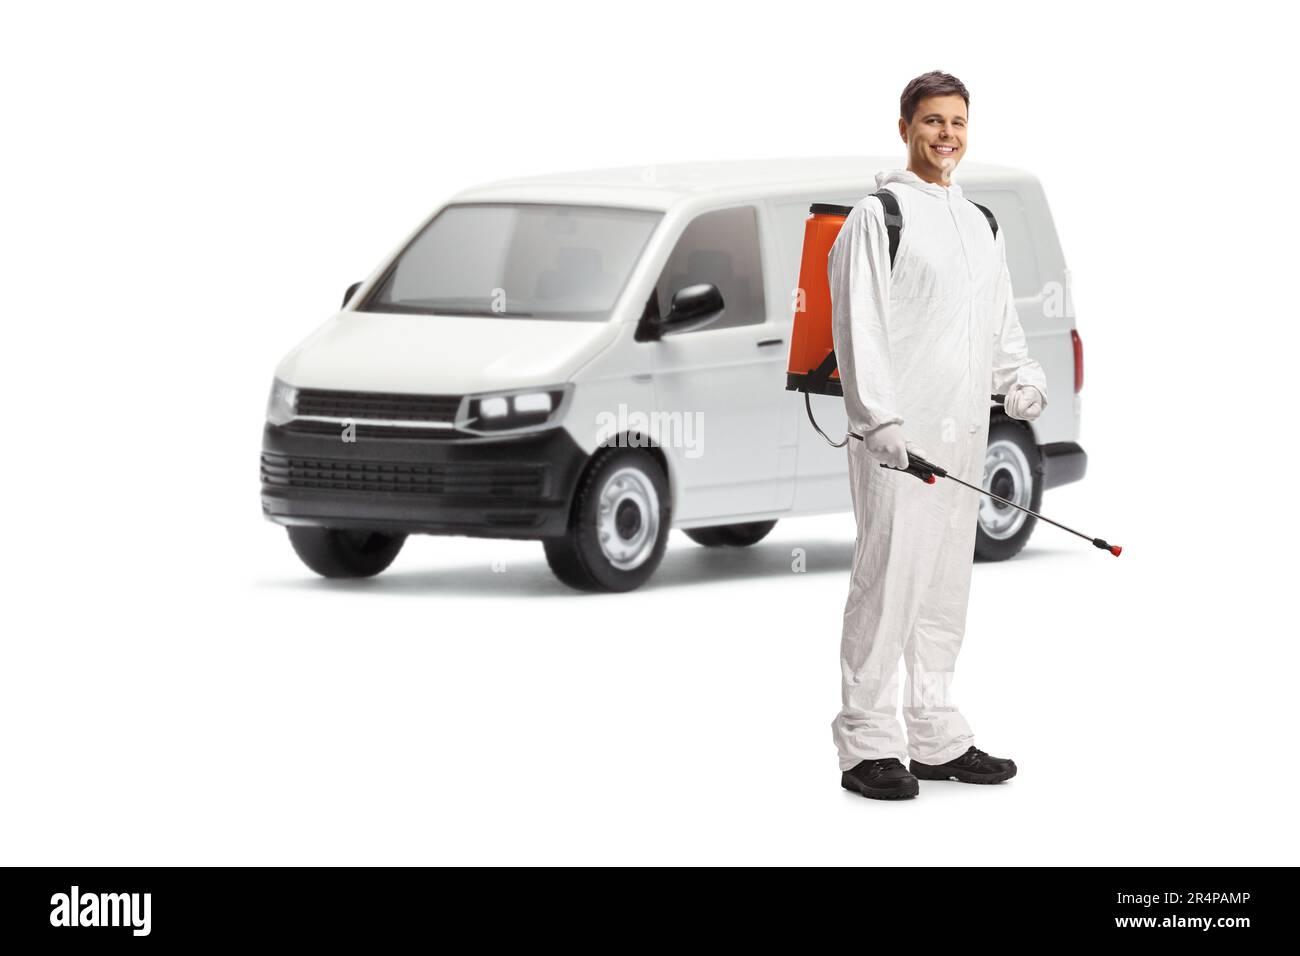 Full length shot of a pest control professional in a white suit standing in front of a van isolated on white background Stock Photo